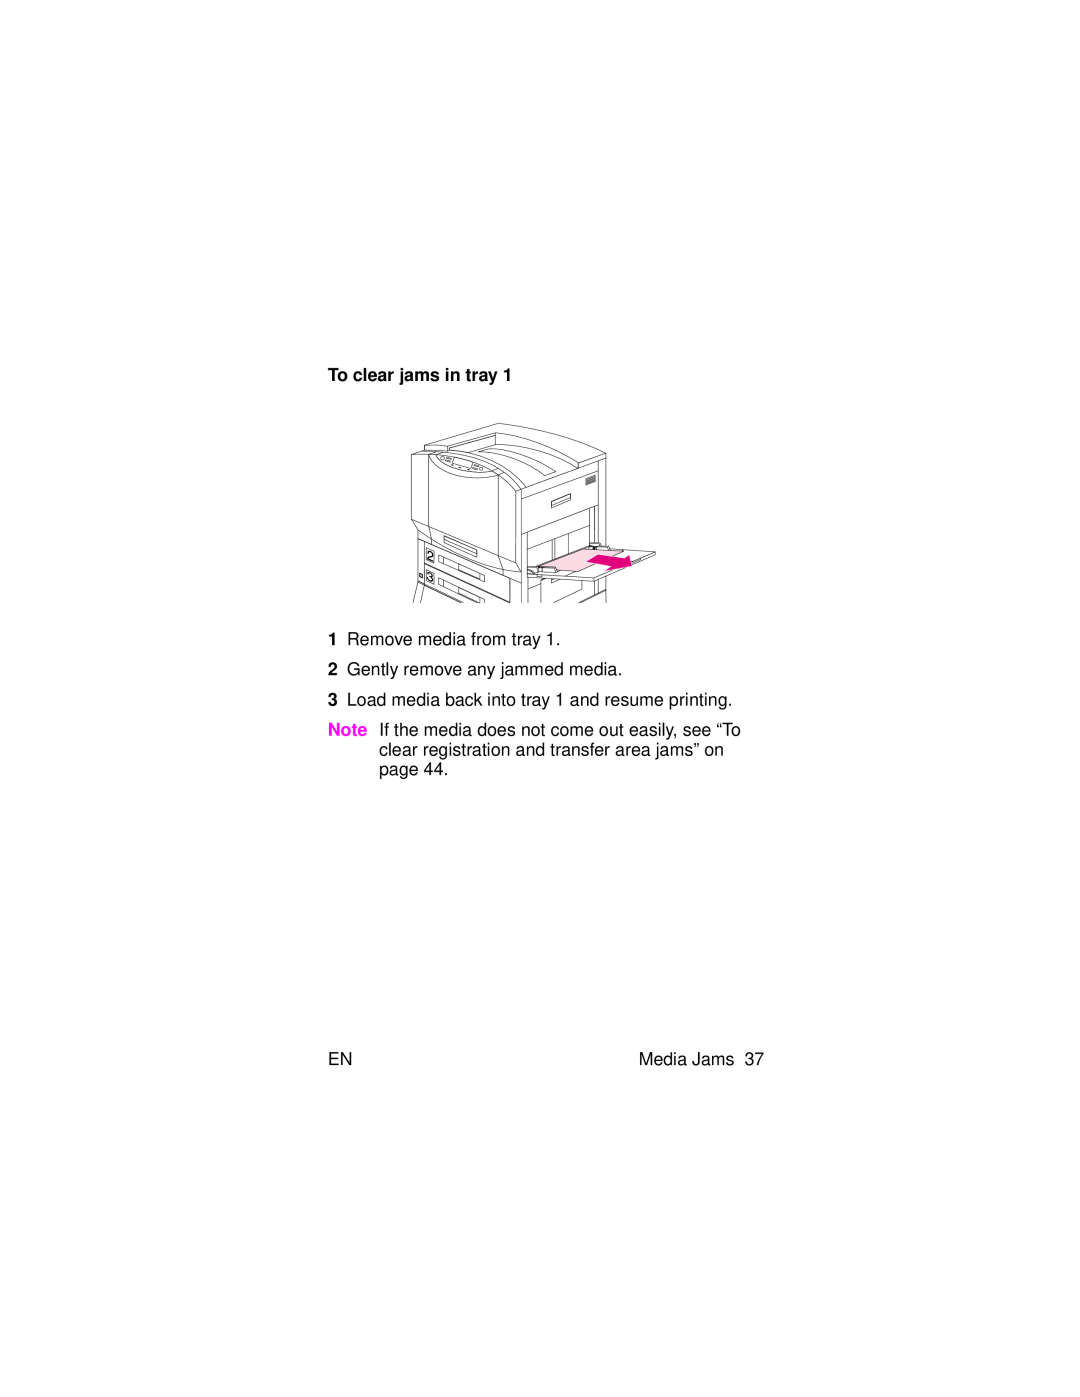 HP 8000 s manual To clear jams in tray, Remove media from tray 2 Gently remove any jammed media, Media Jams 